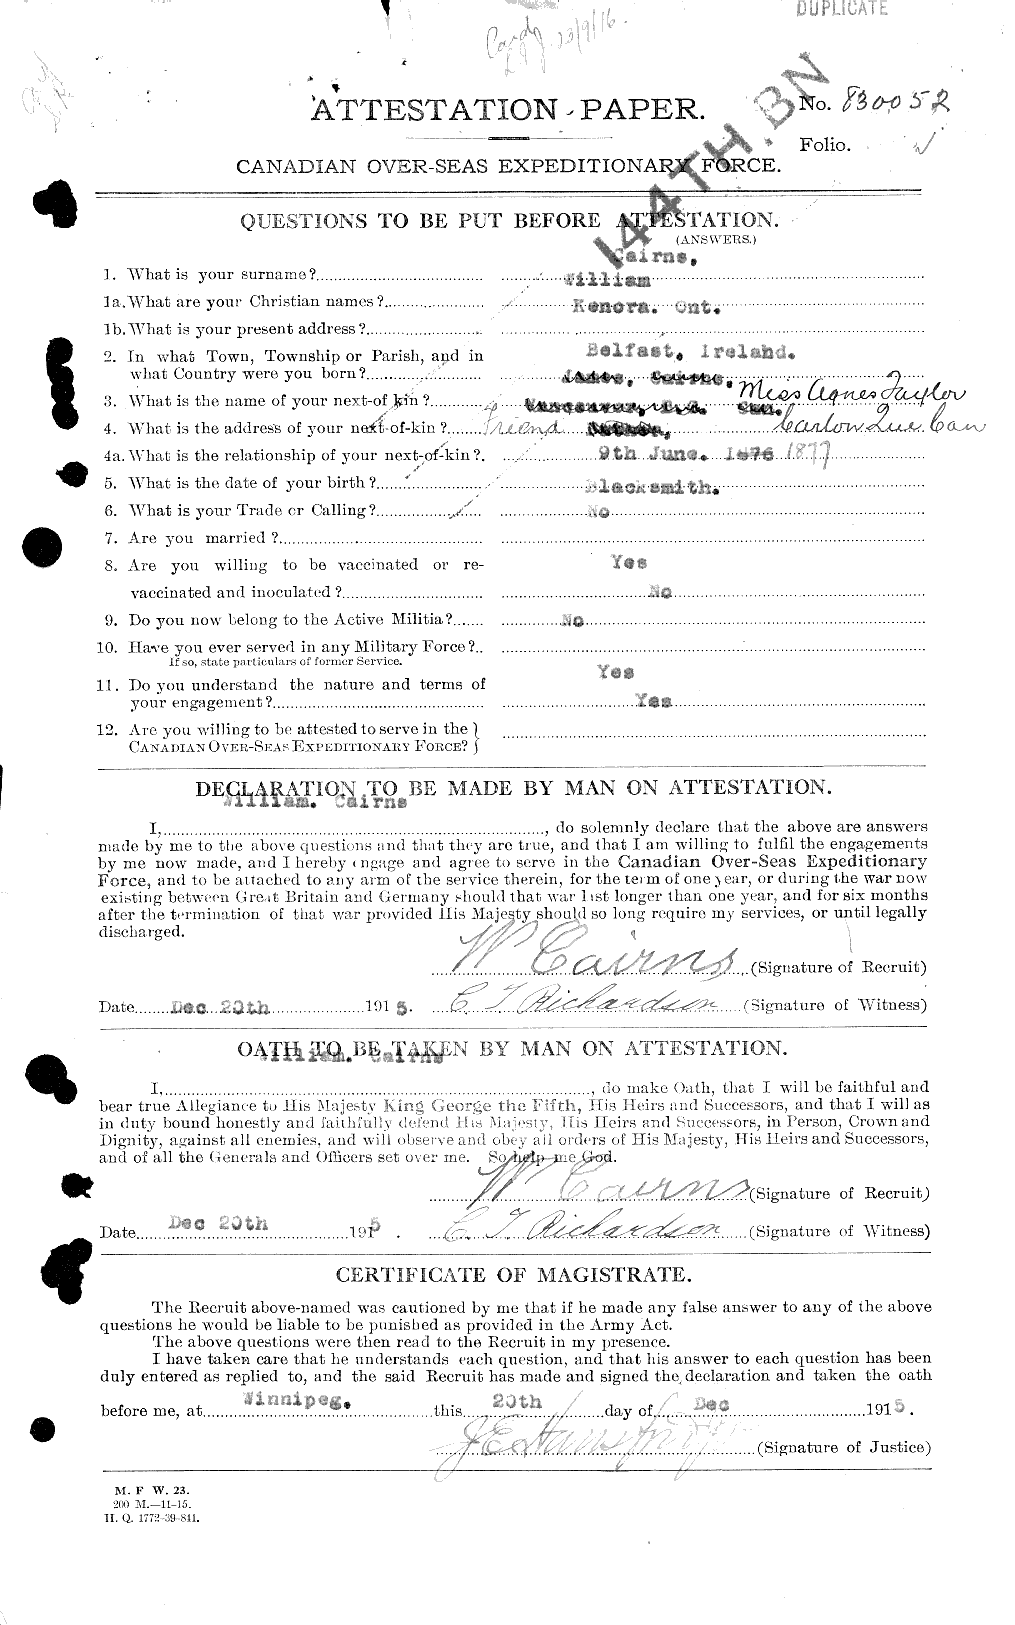 Personnel Records of the First World War - CEF 000539a